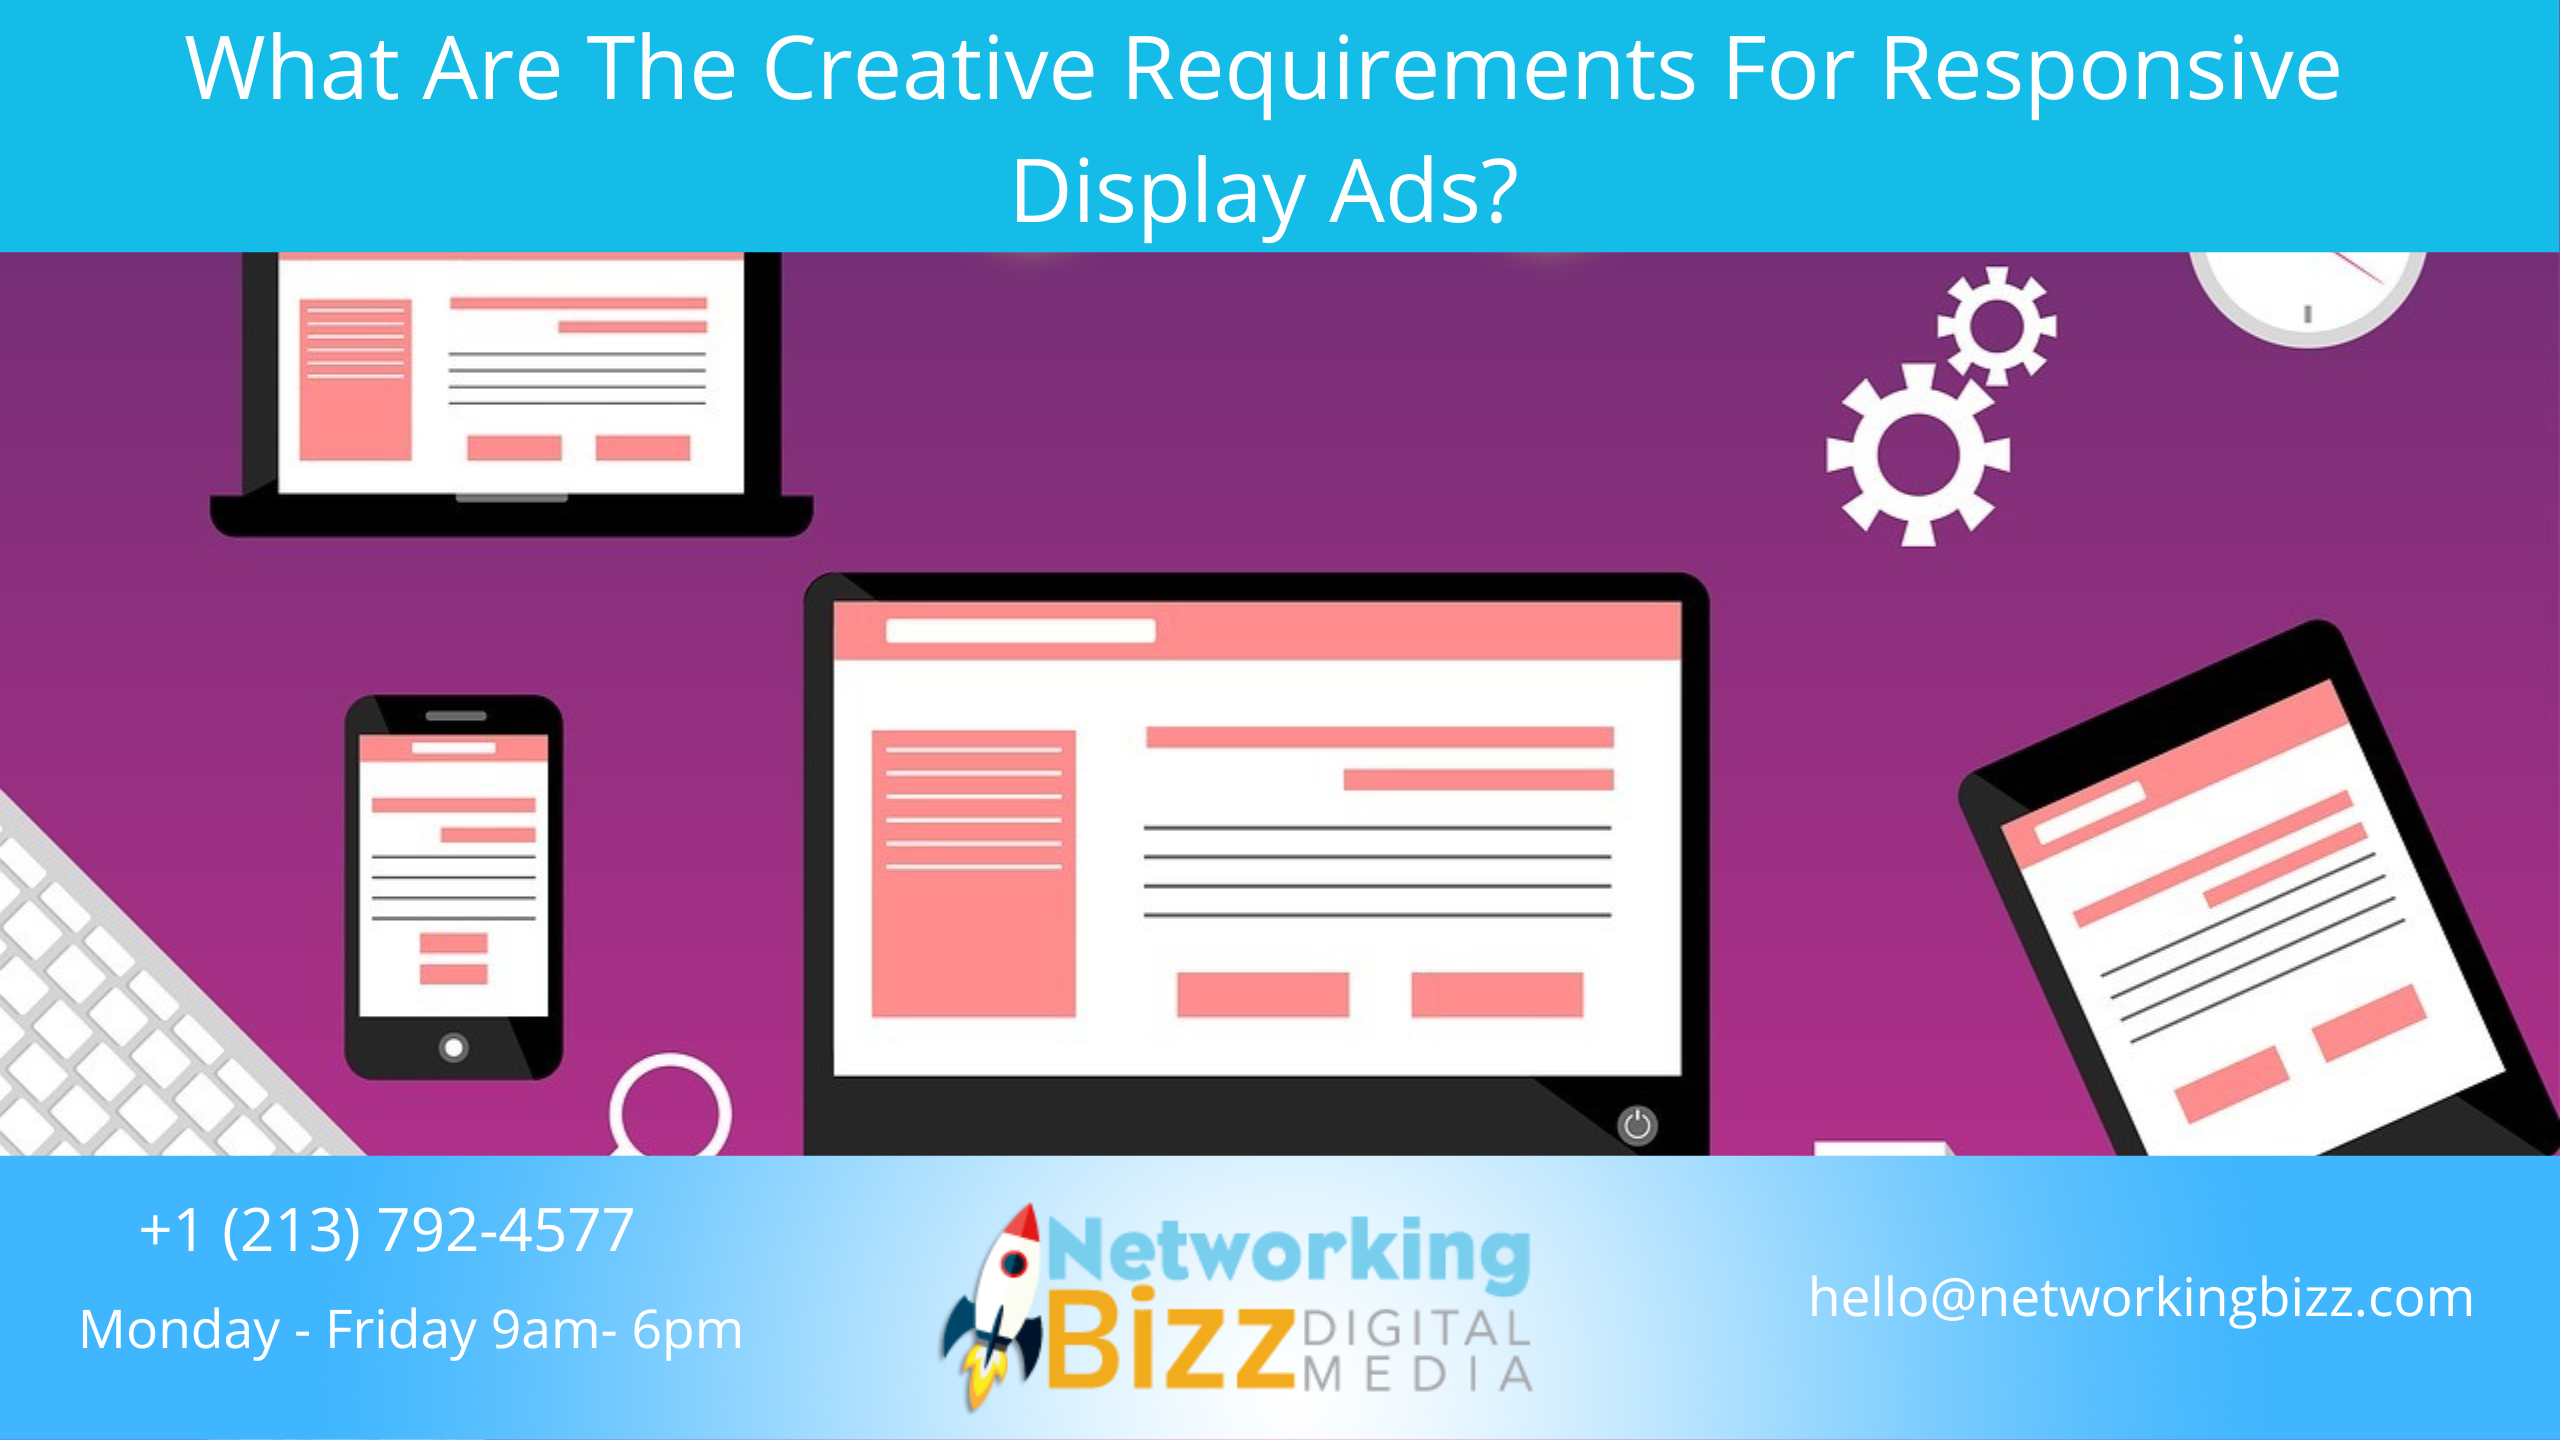 What Are The Creative Requirements For Responsive Display Ads?